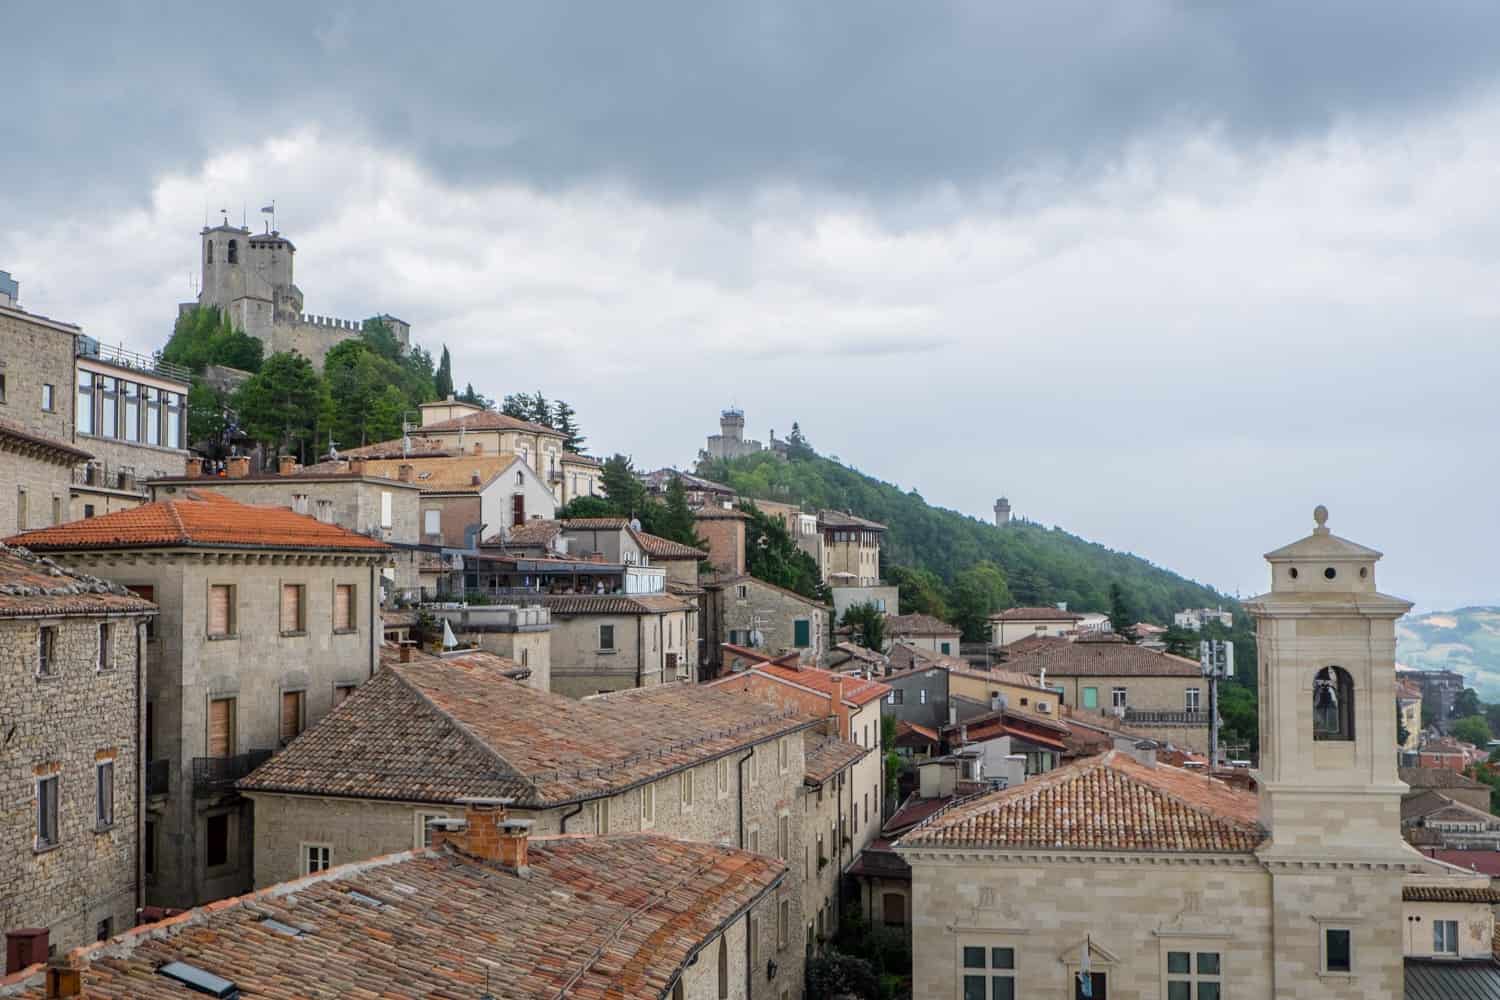 Views from the San Marino Palace rooftop